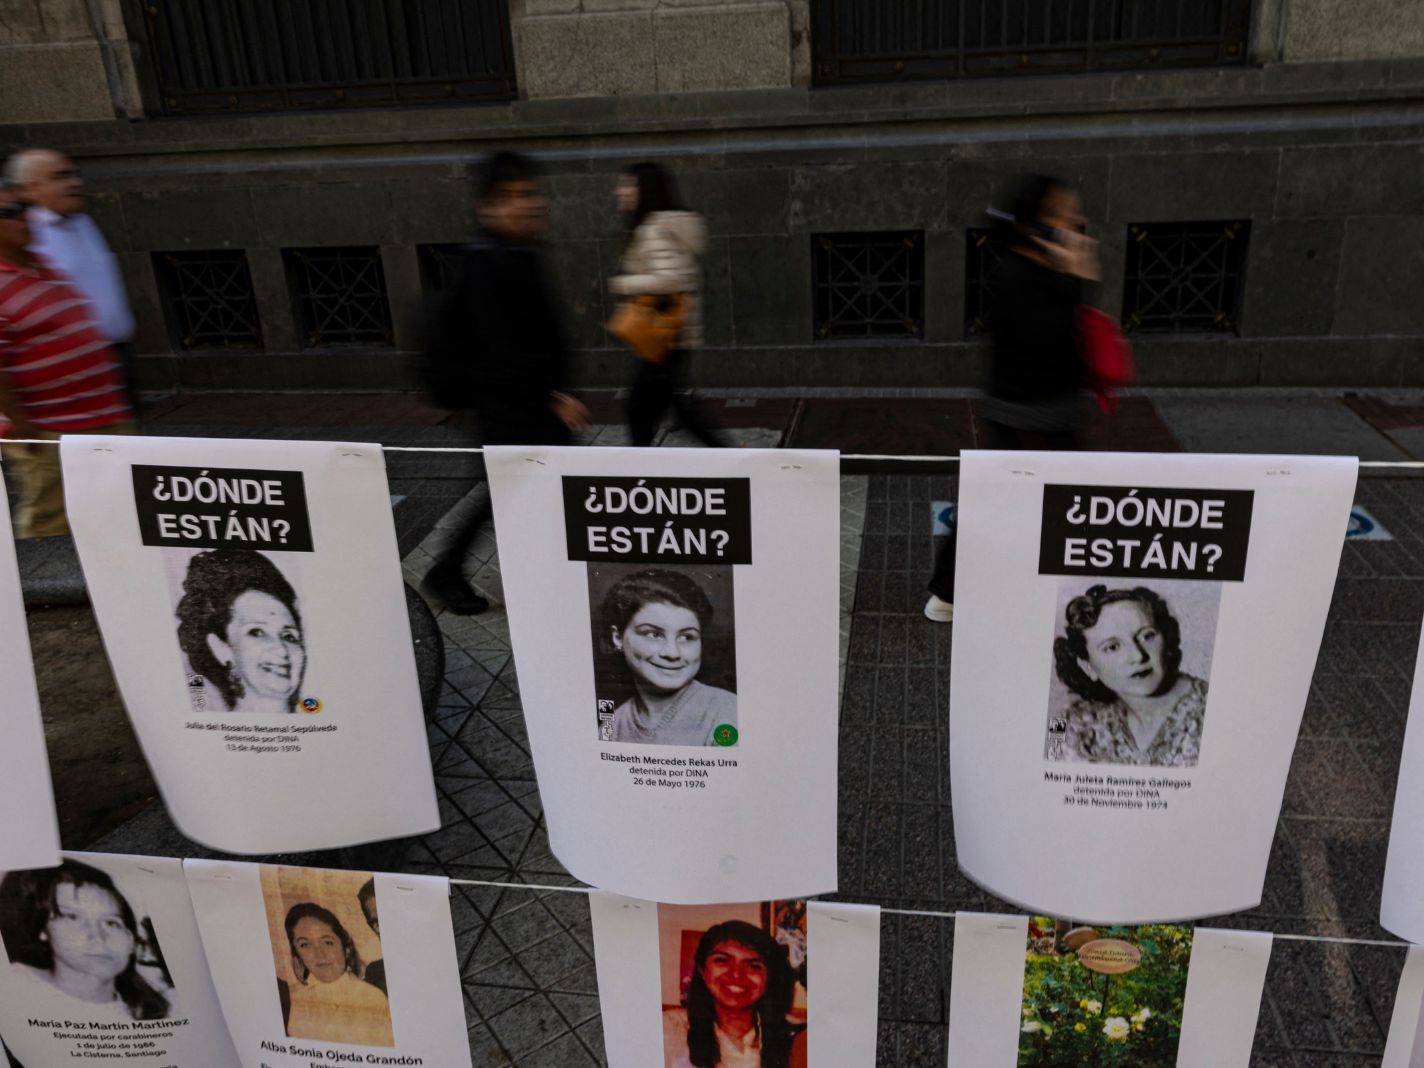 Pictures of women who disappeared and were politically executed during Augusto Pinochet's dictatorship (19731990) hang in a memorial installed by the Chilean Network against Violence against Women, in downtown Santiago on August 3, 2023. September 11 marks the 50th anniversary of the coup d'état led by General Augusto Pinochet that overthrew Chilean President Salvador Allende. (Photo by MARTIN BERNETTI / AFP) (Photo by MARTIN BERNETTI/AFP via Getty Images)